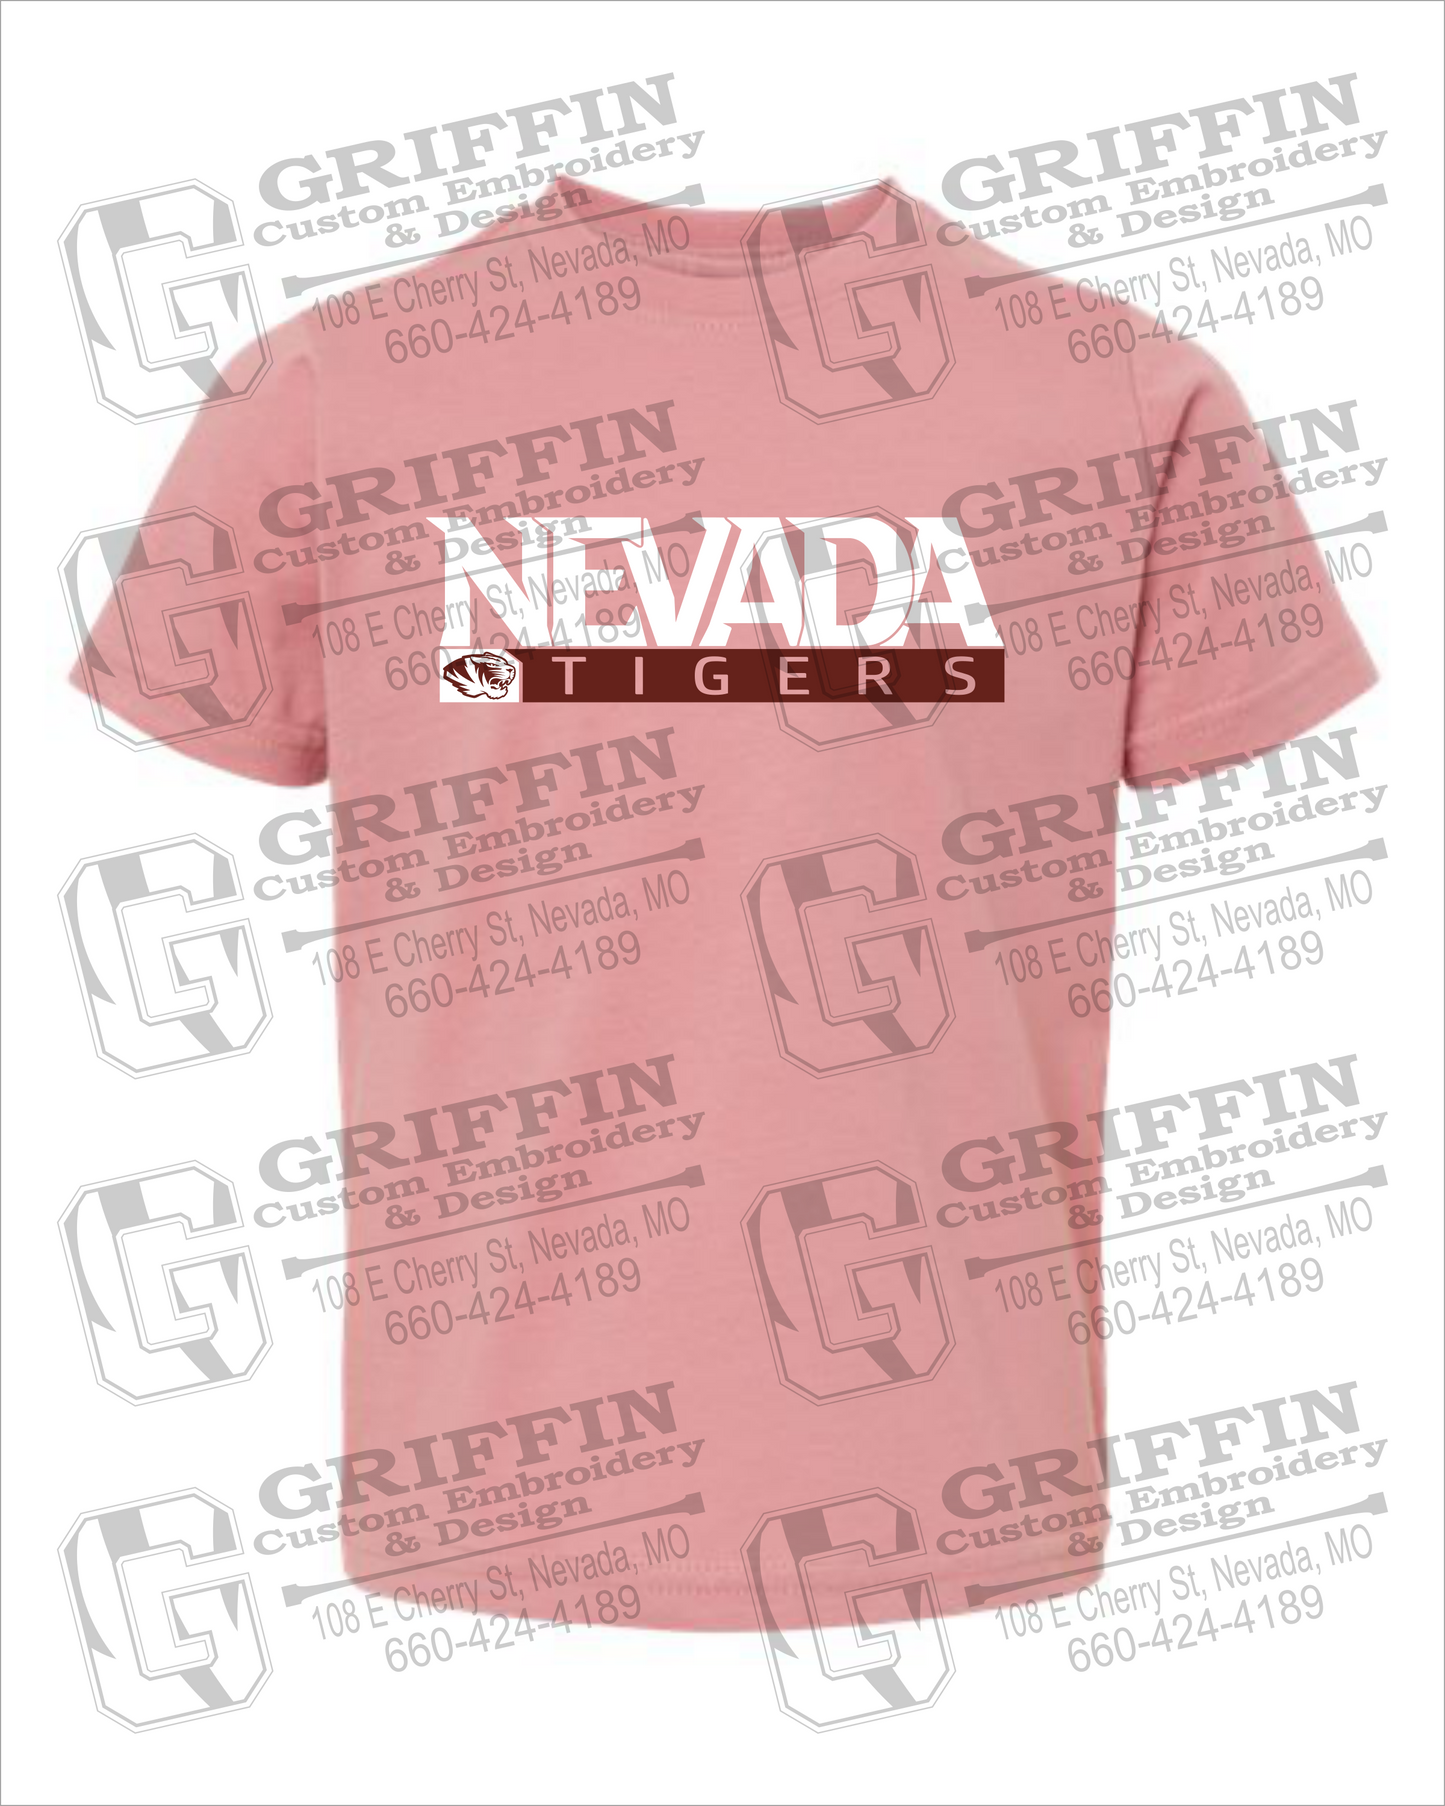 Nevada Tigers 22-G Toddler/Infant T-Shirt